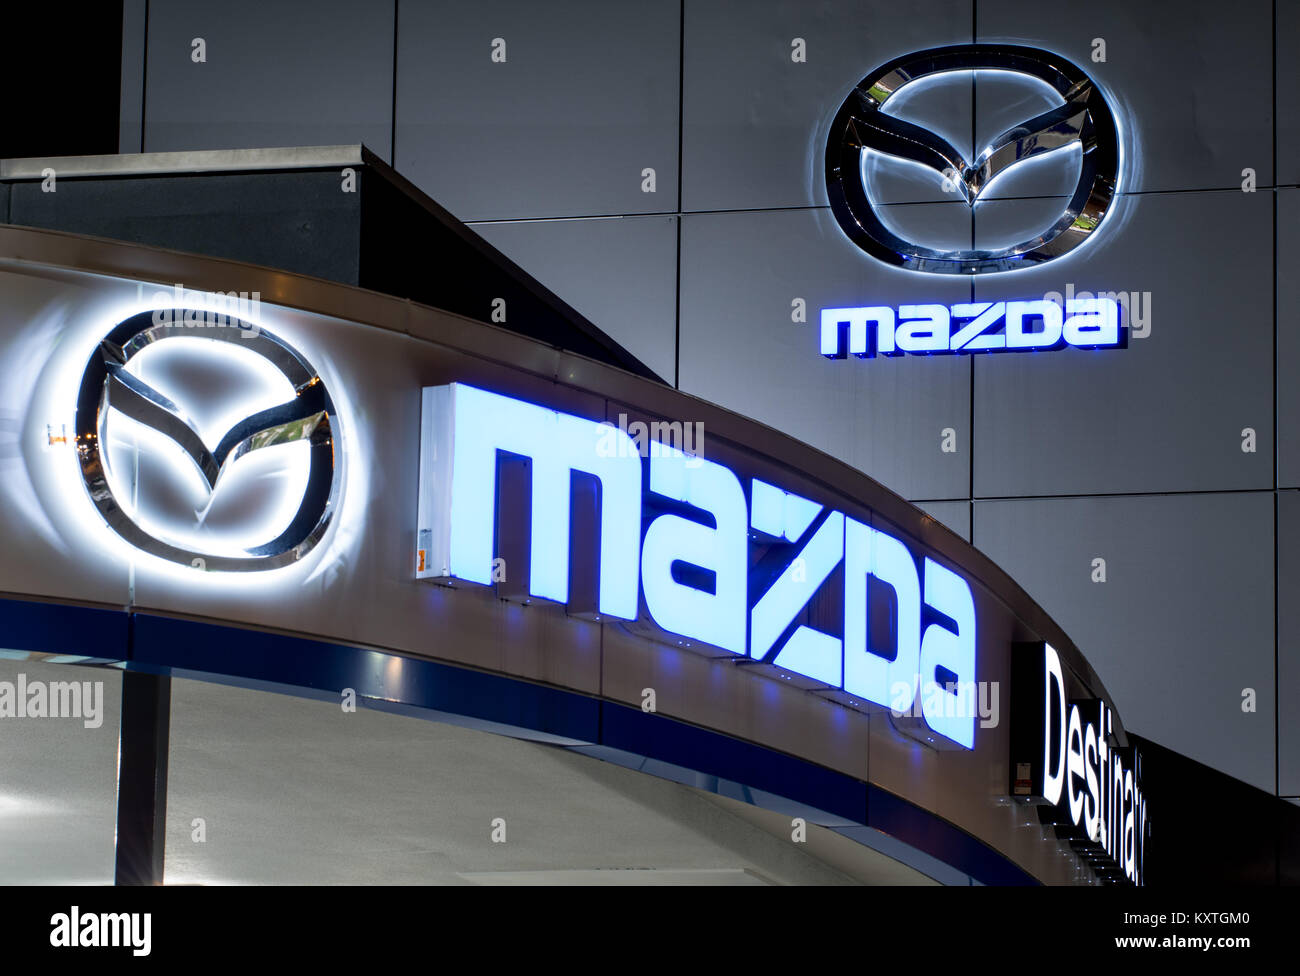 Vancouver. Canada - January 9, 2018: Mazda logo on the facade of official dealer office. Mazda Motor Corporation is a Japanese car brand, automotive m Stock Photo